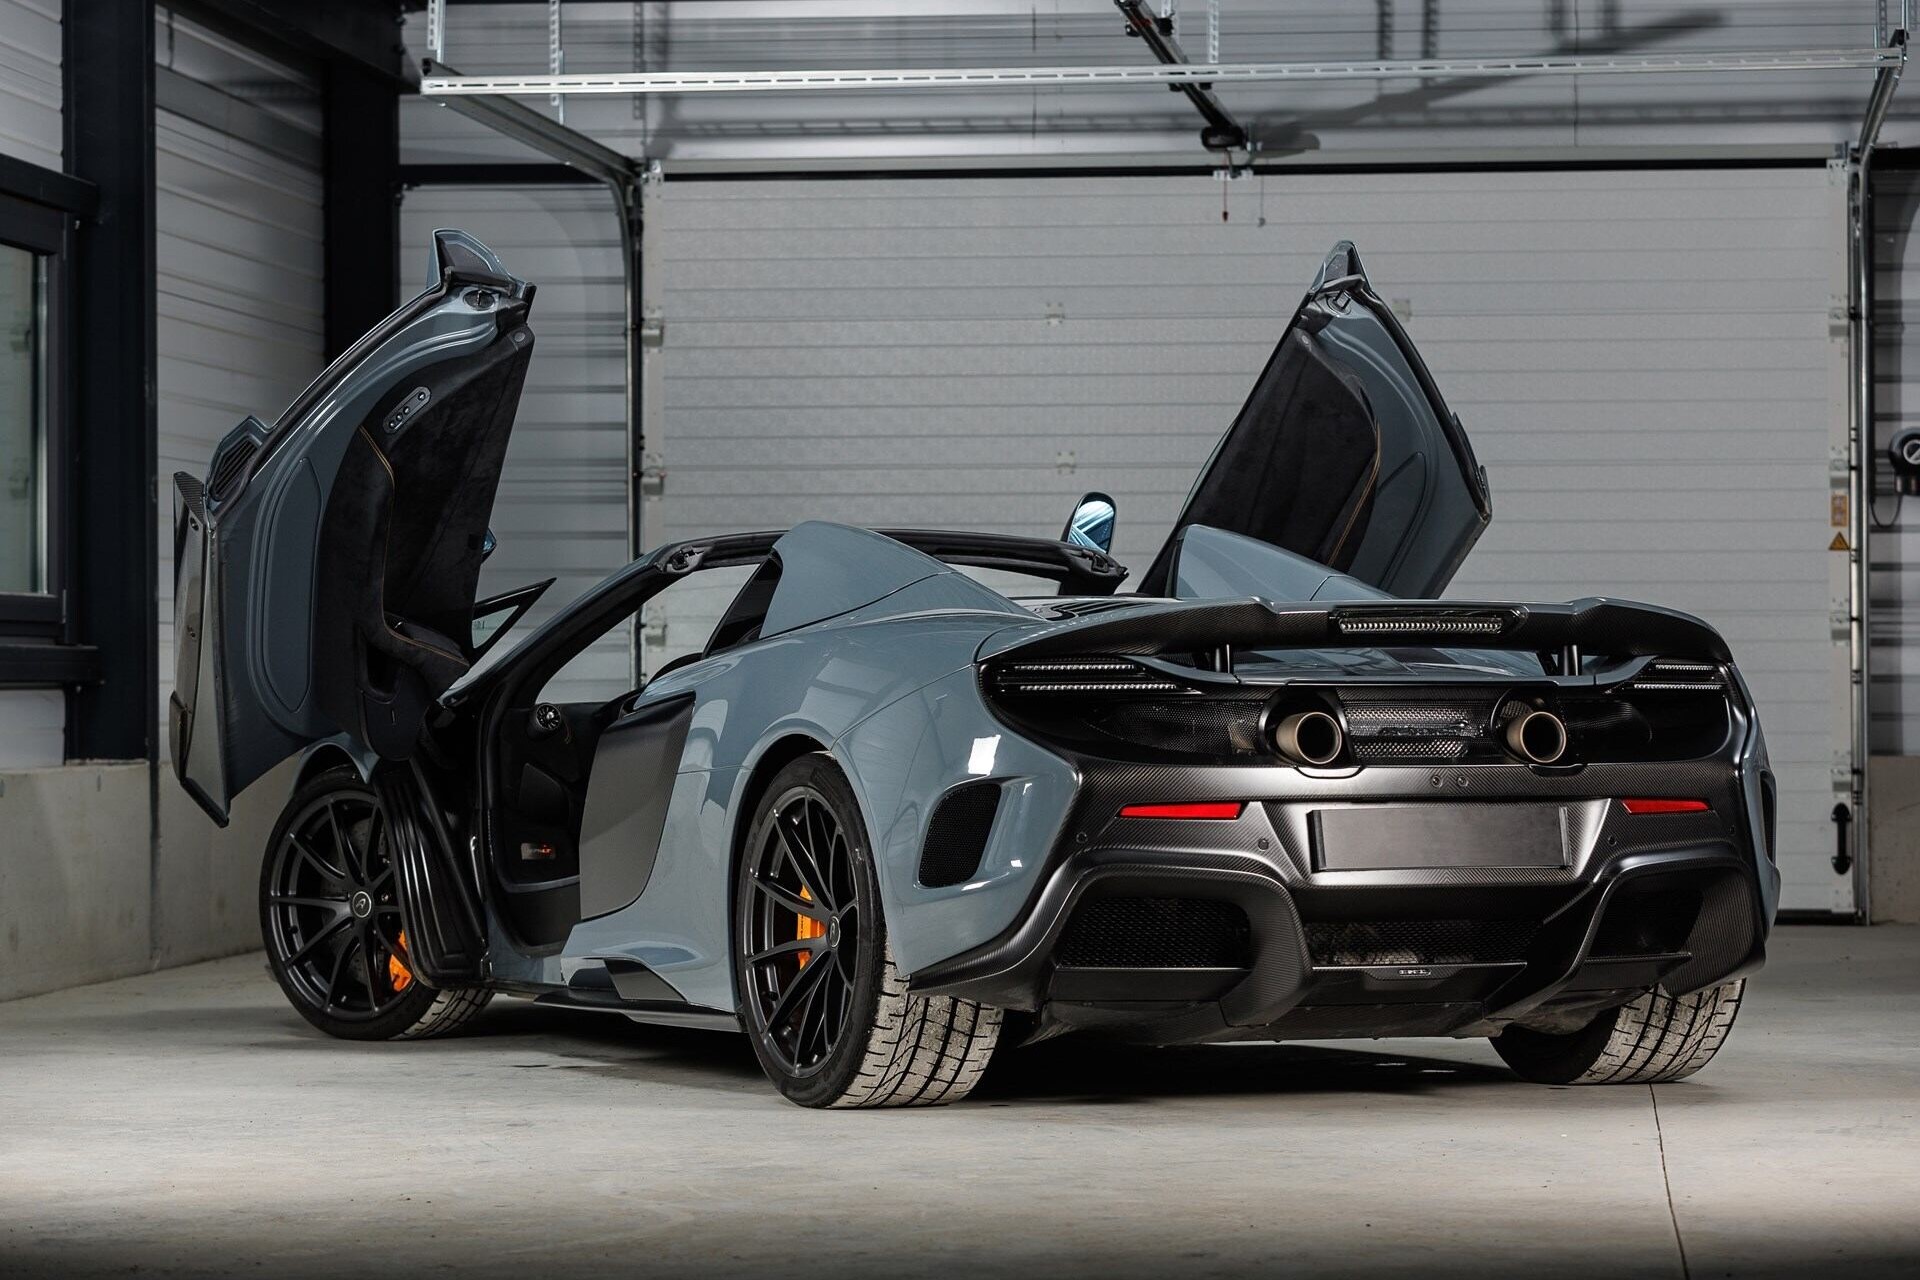 Rear angled view of a 2017 Chicane Grey McLaren 675LT with doors open